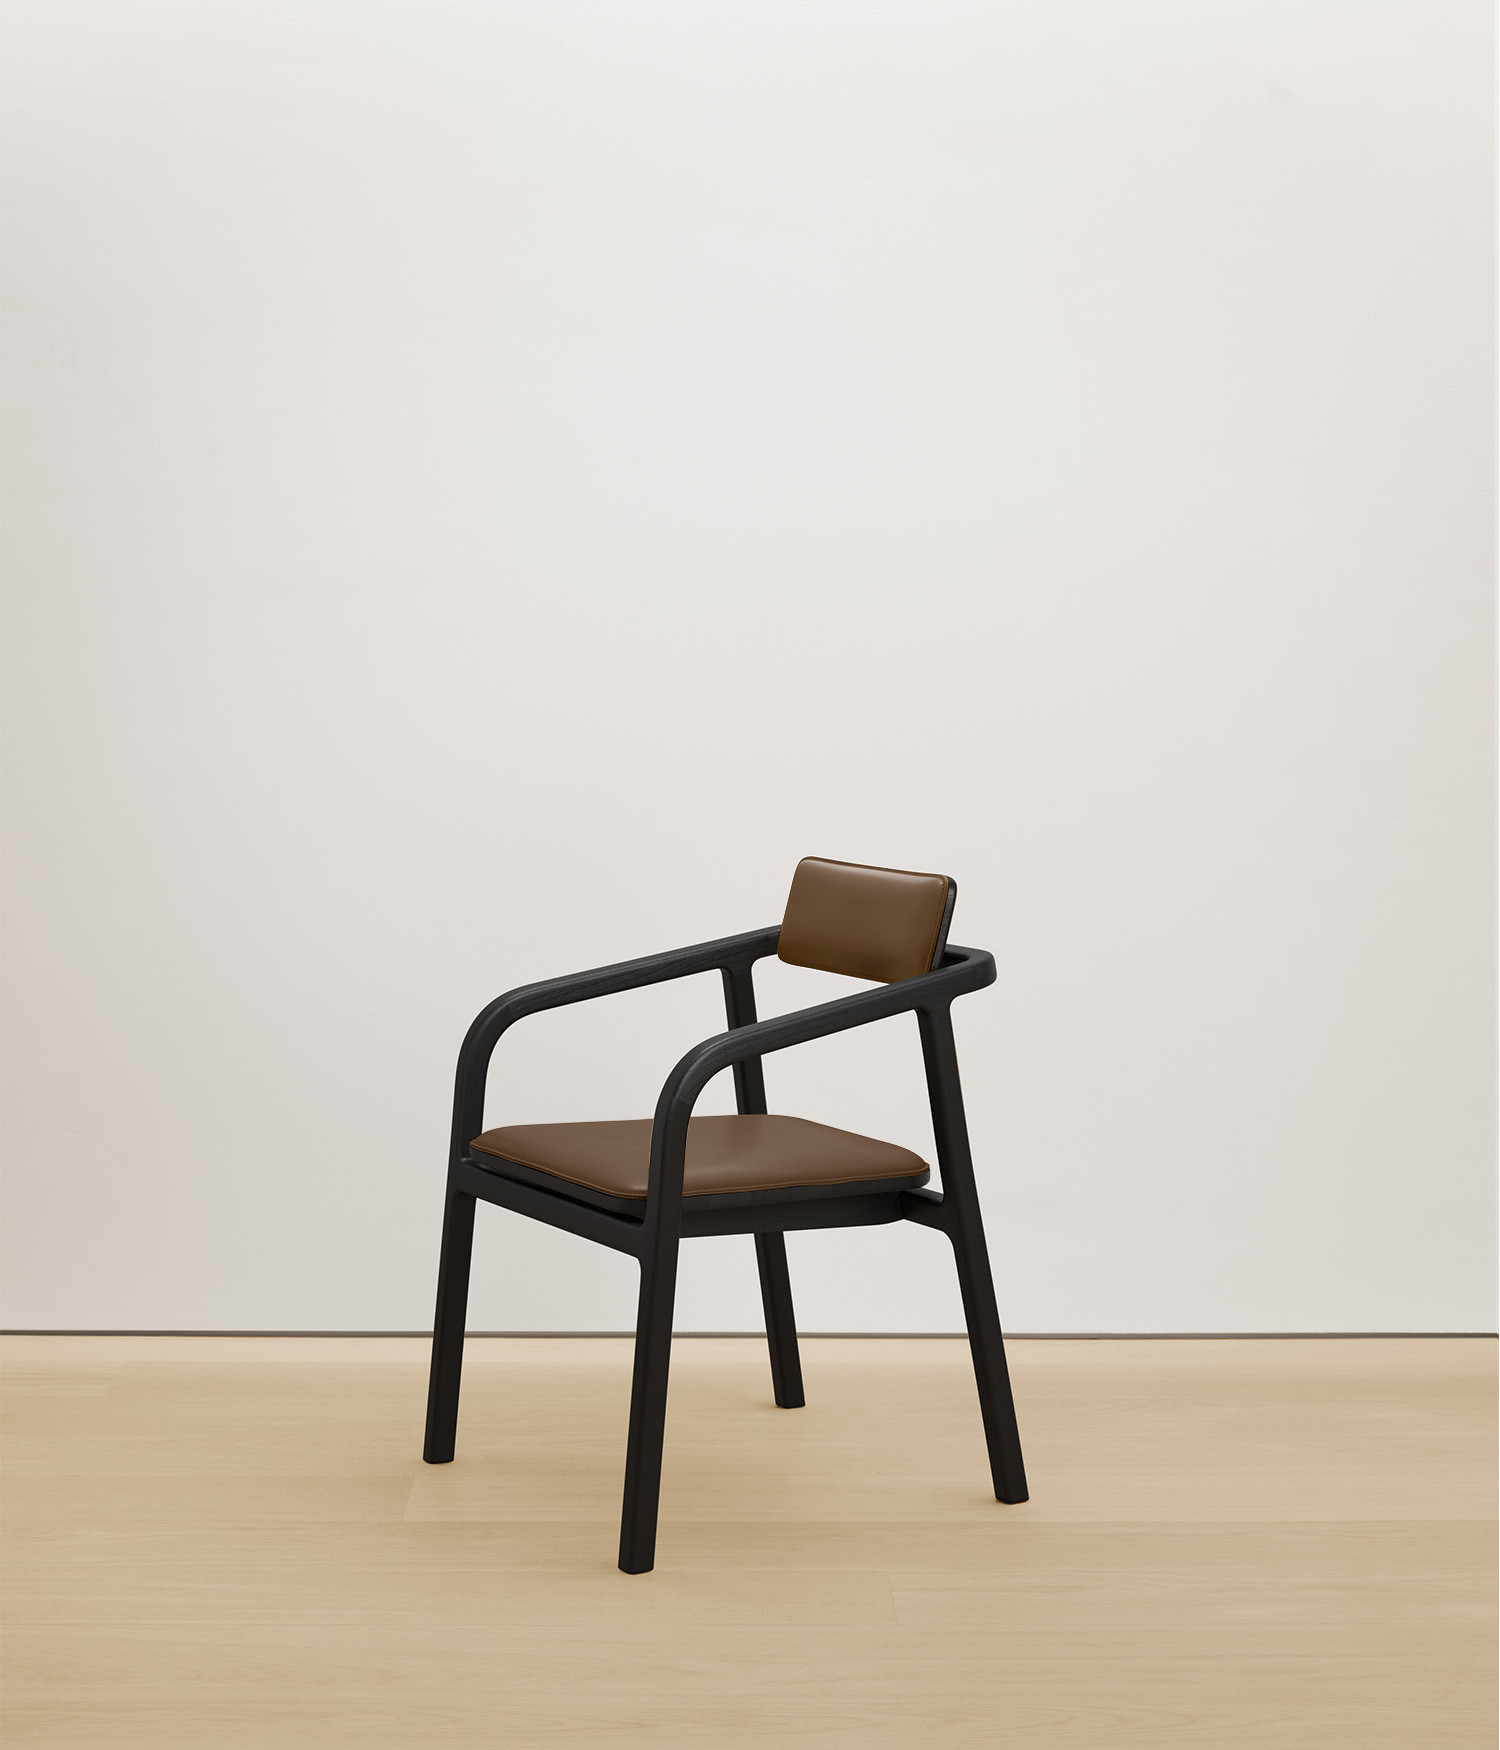  black-stained-oak chair with umber color upholstered seat